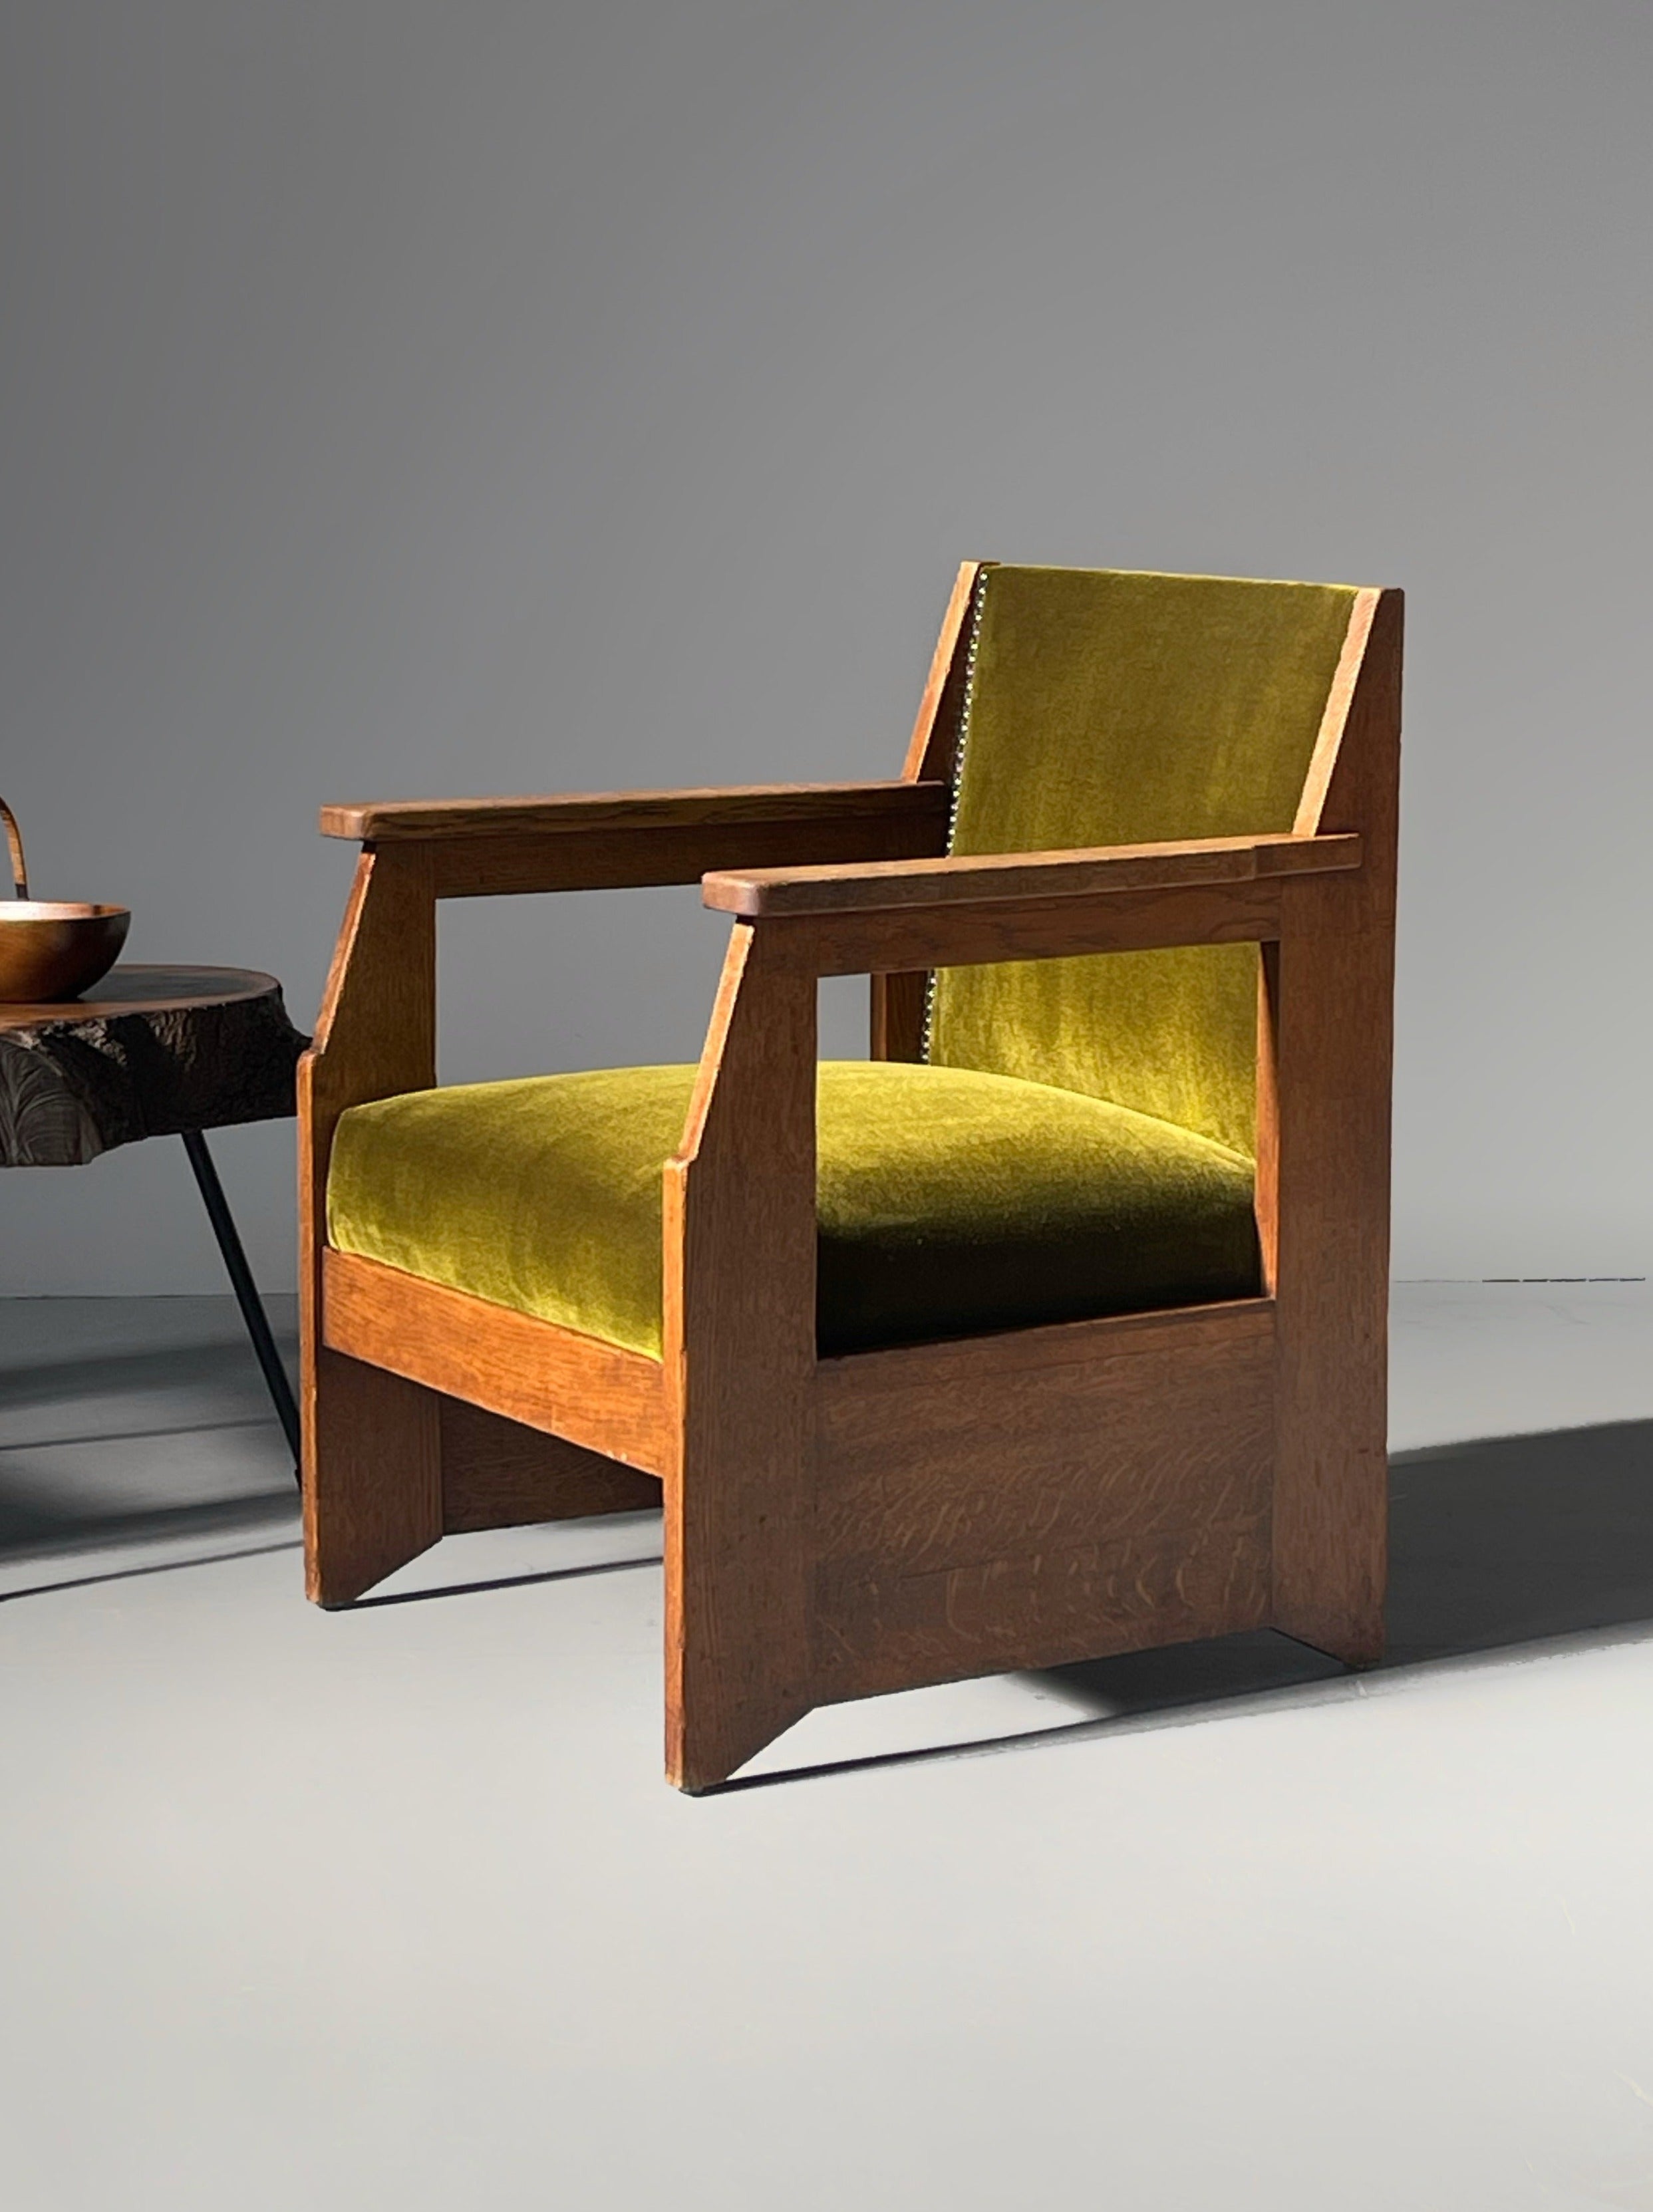 Haagse school style Chairs by Hendrik Wouda for Pander